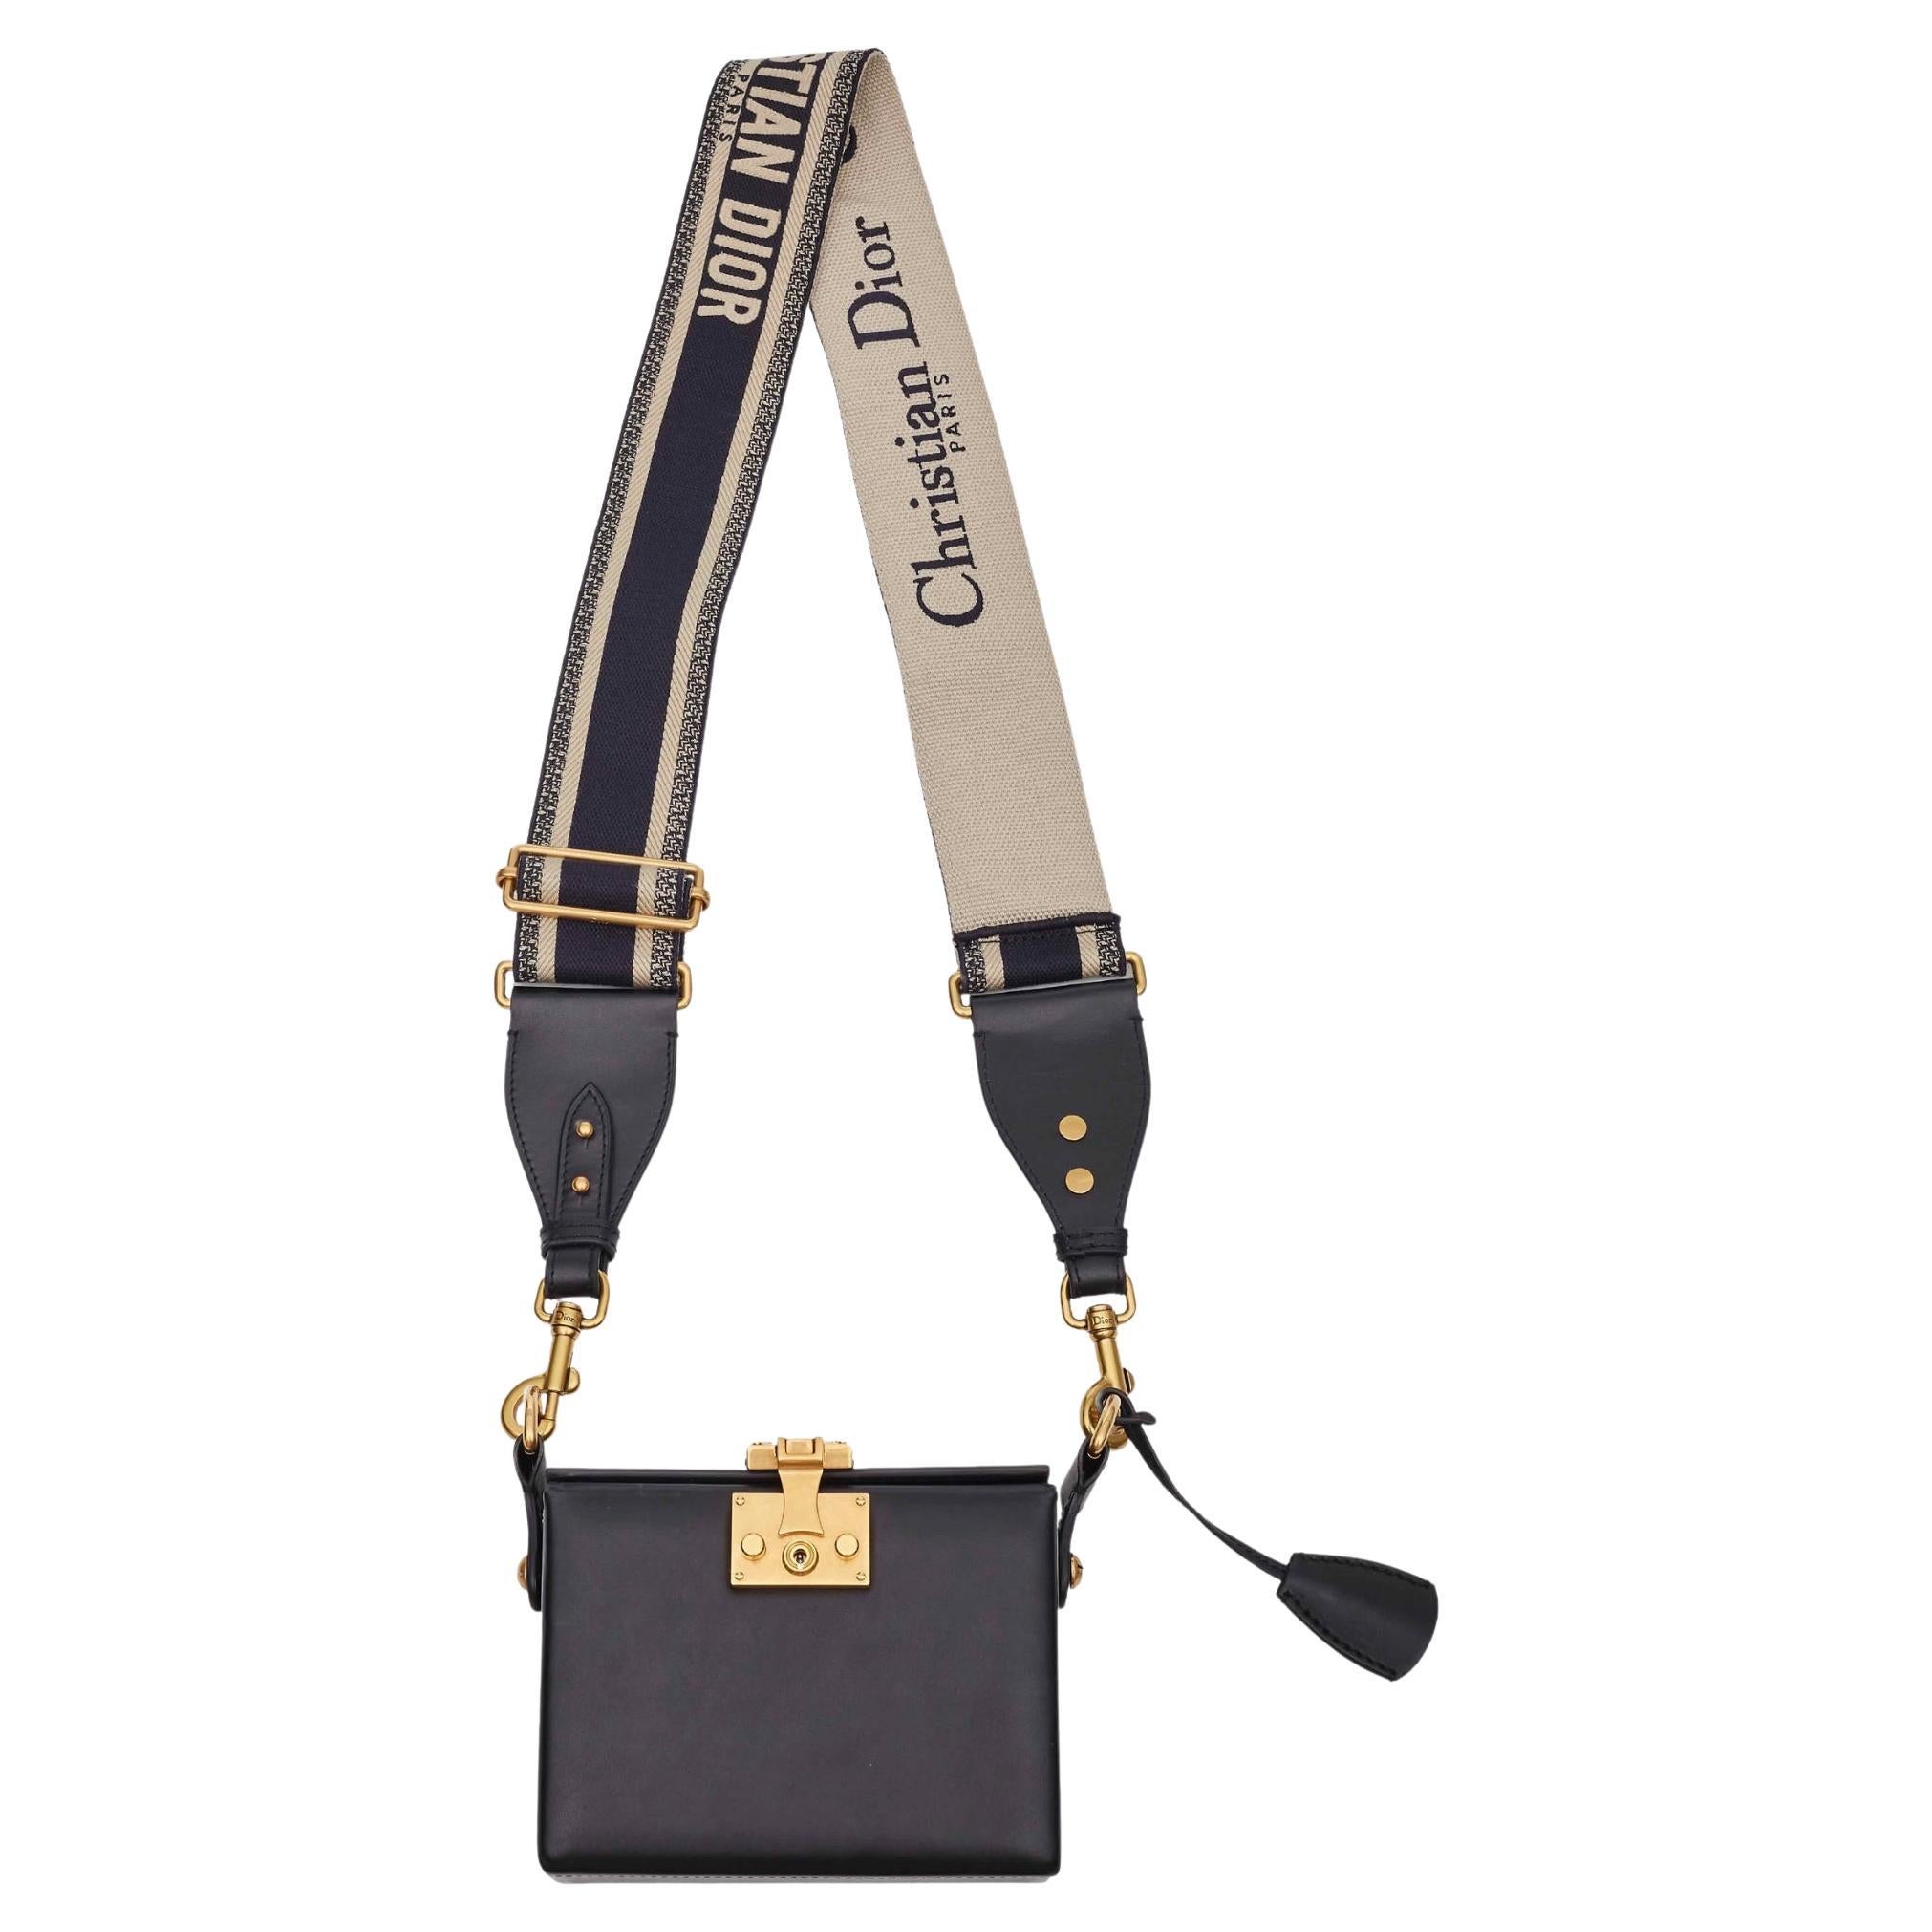 Does the Dior Saddle Bag hold its value?